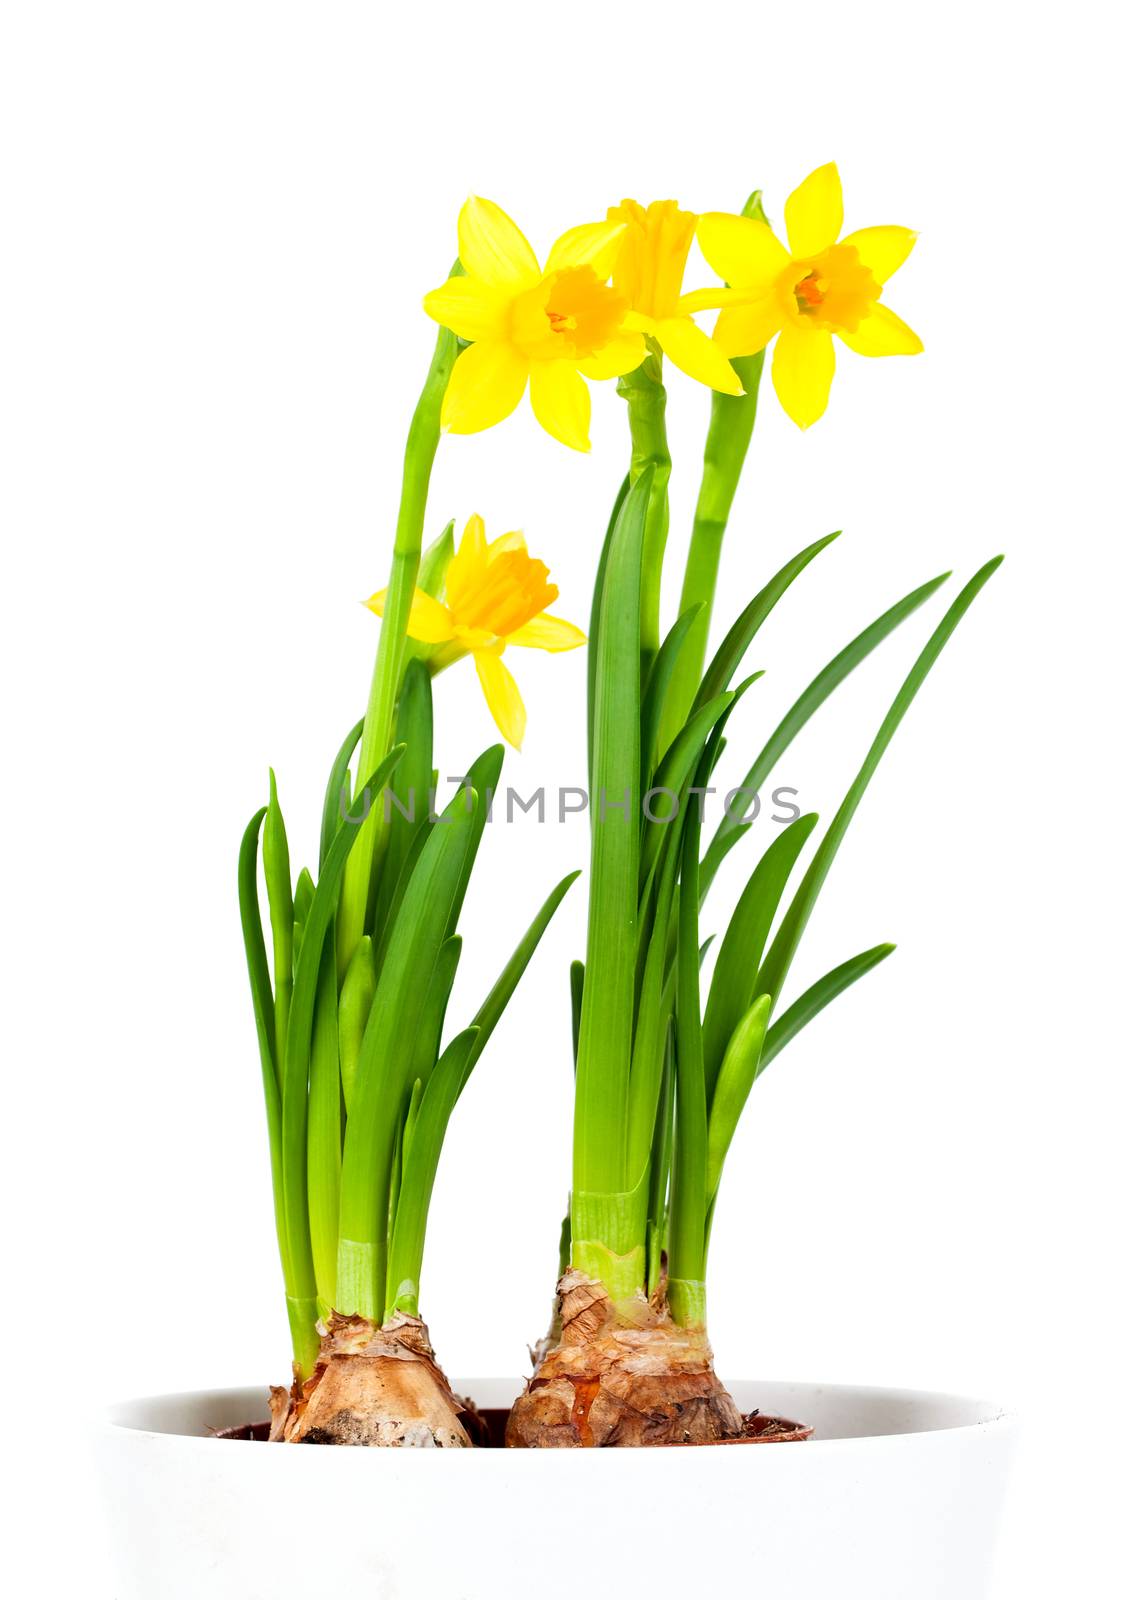 Daffodils (Narcissus) in flower pot